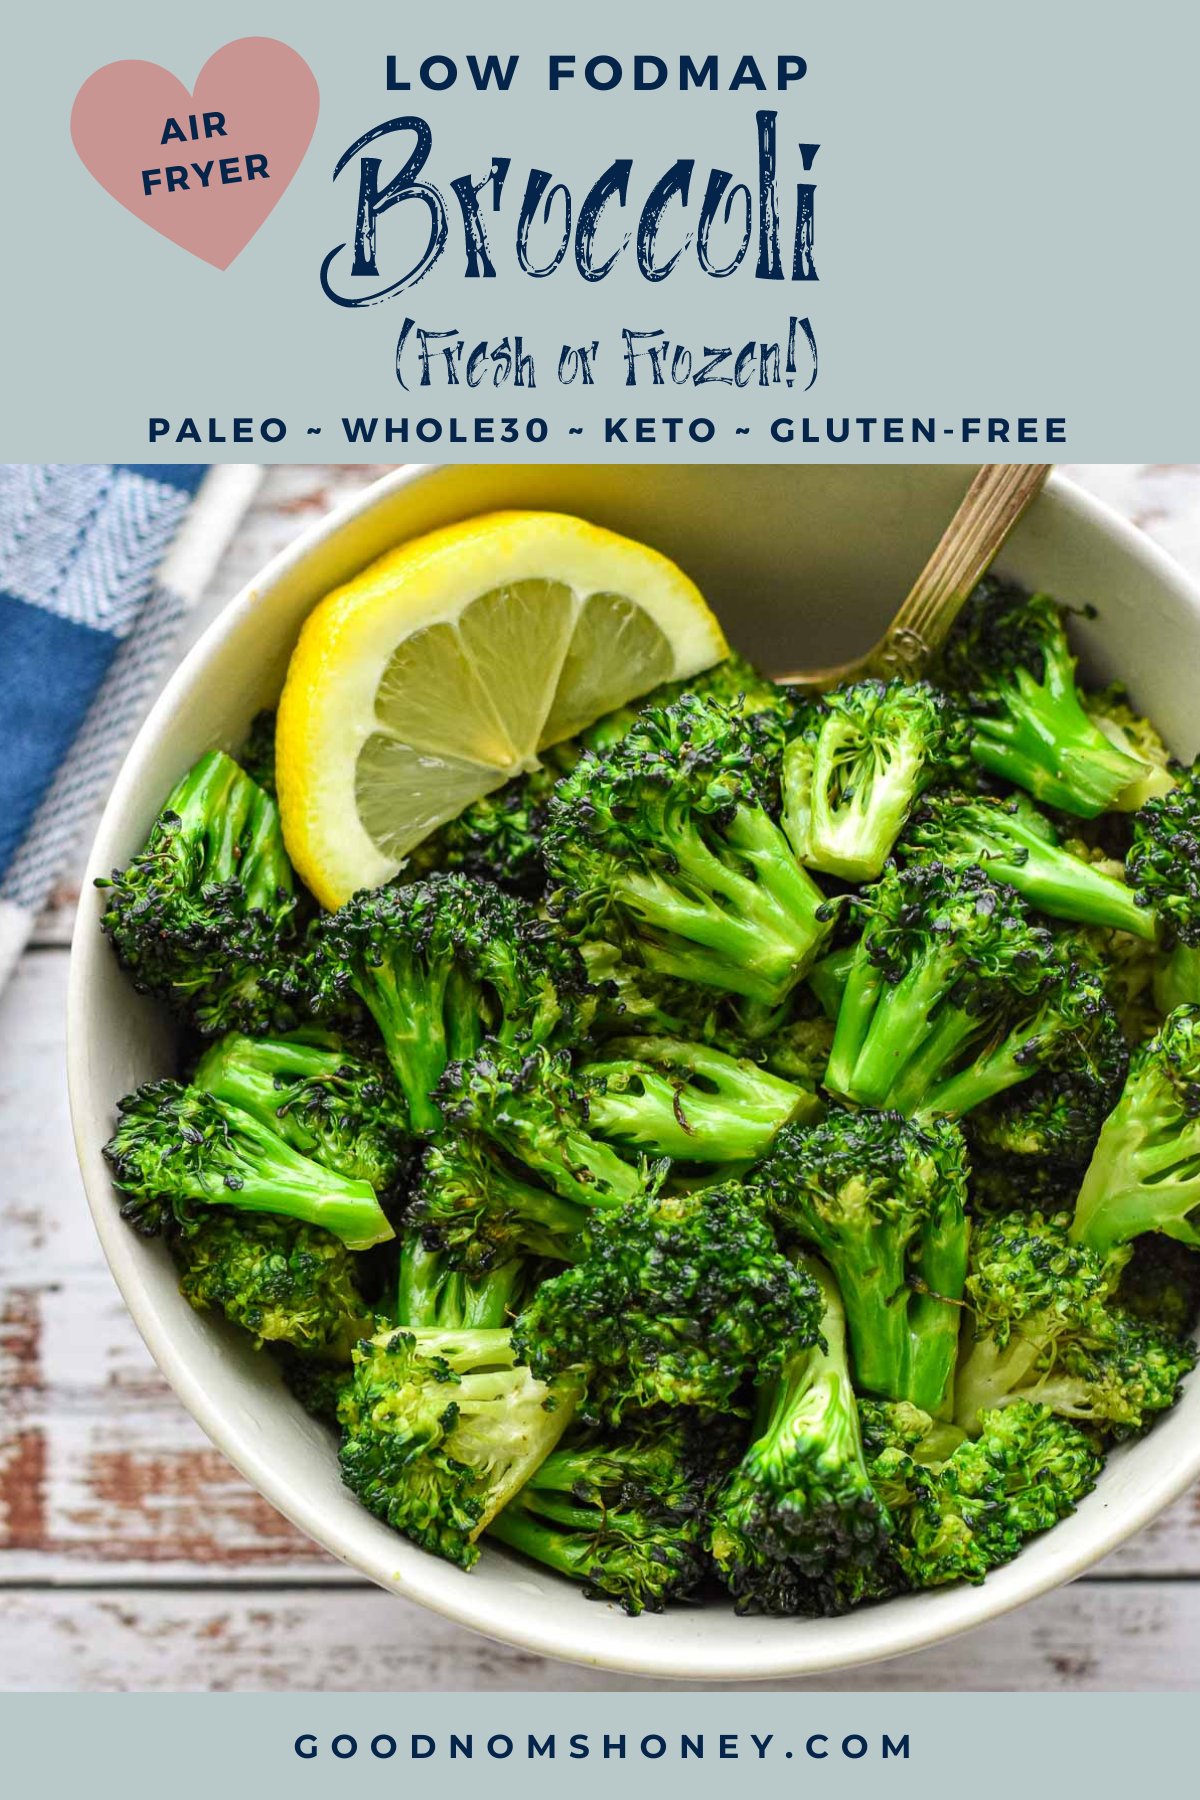 pinterest image with low fodmap air fryer broccoli fresh or frozen paleo whole30 keto gluten-free at the top and goodnomshoney.com at the bottom